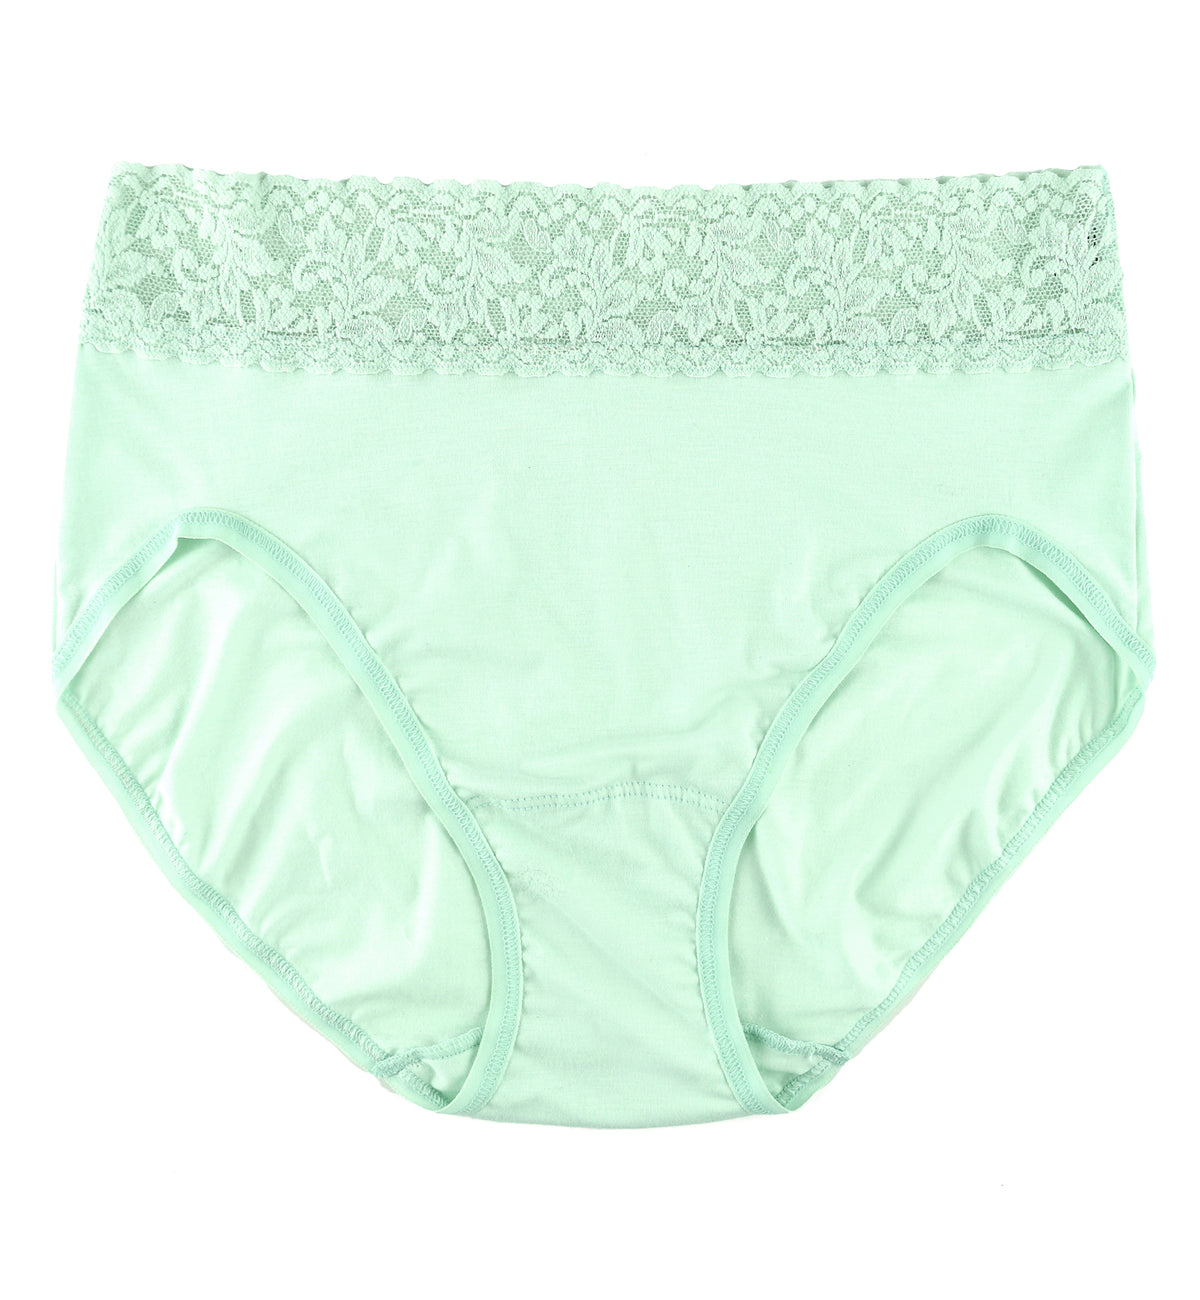 Hanky Panky Cotton French Brief with Lace (892461),Small,Cucumber - Cucumber,Small